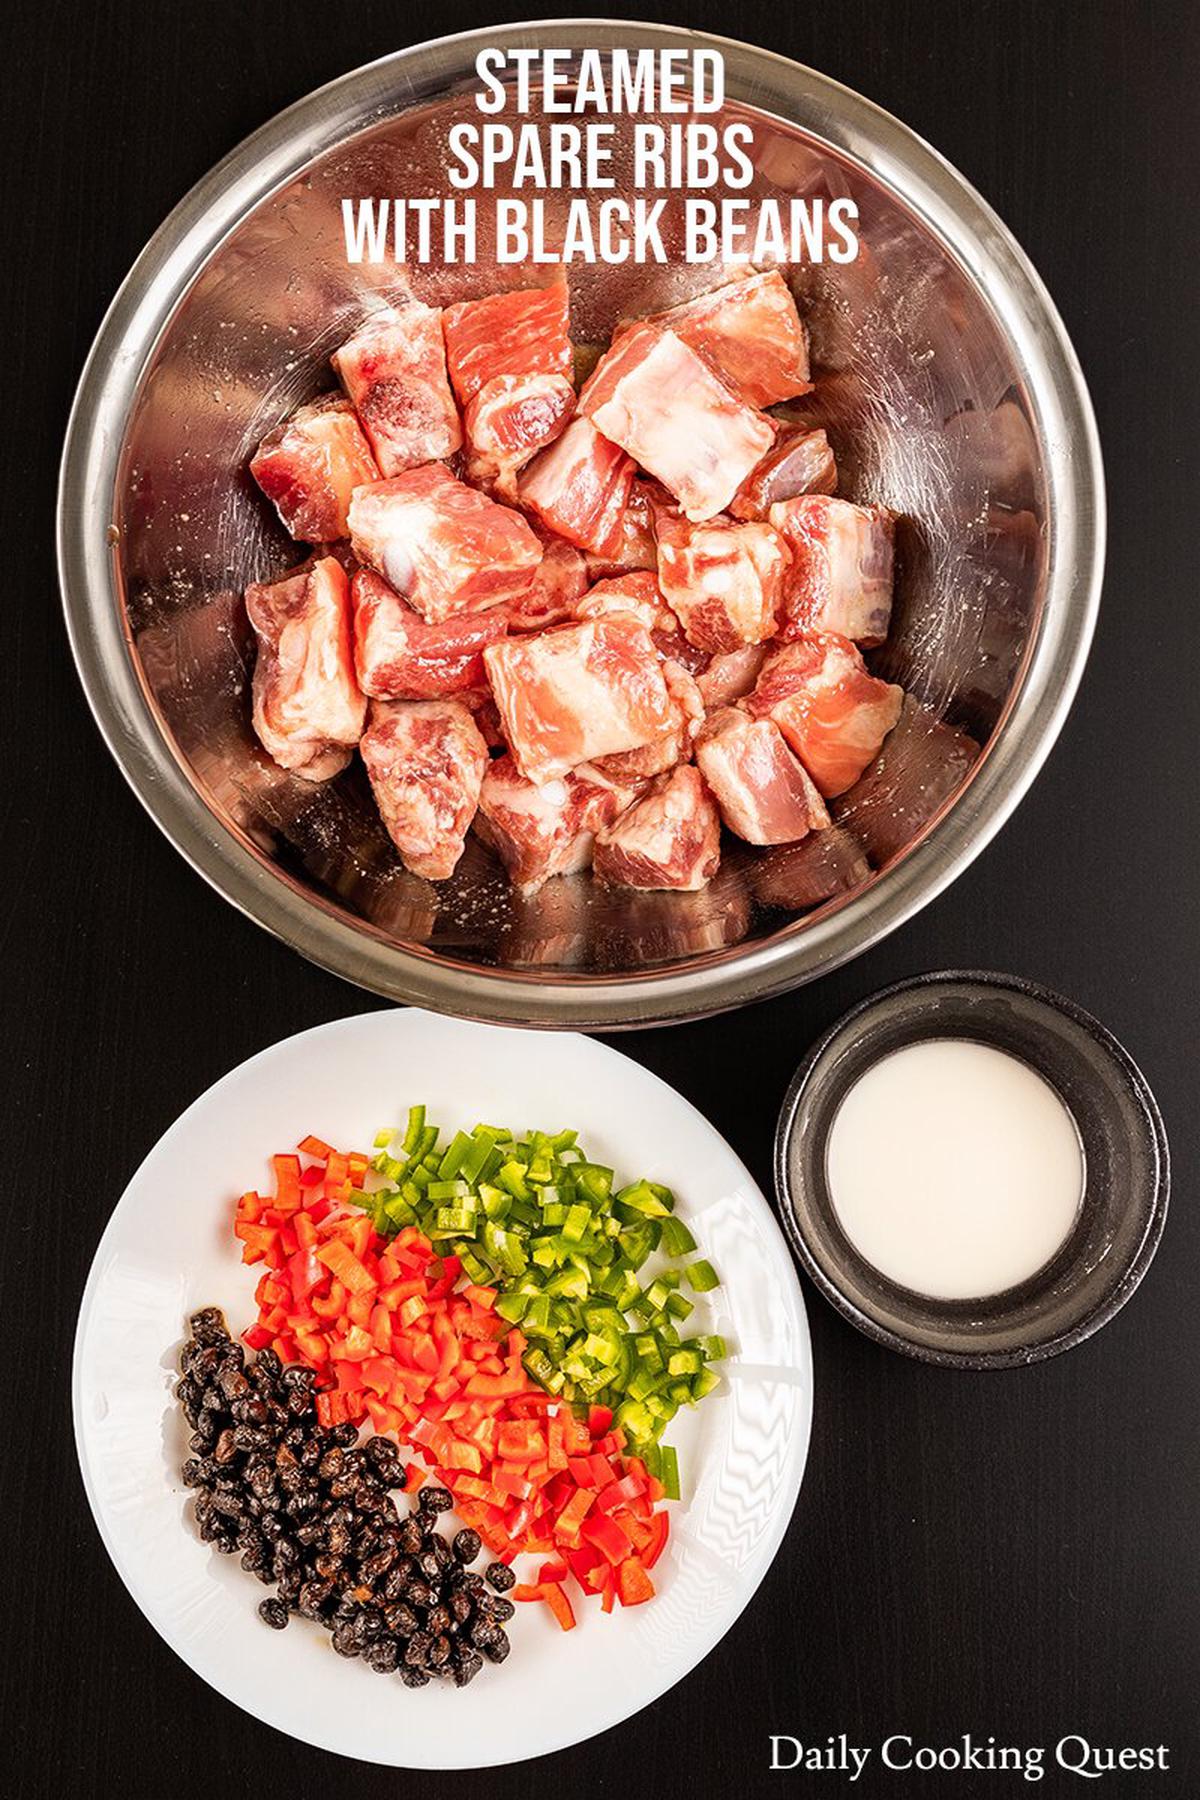 To prepare Chinese steamed spare ribs with black beans, you will need marinated spare ribs, chopped red and green chilies, Chinese fermented black beans, and corn starch slurry.